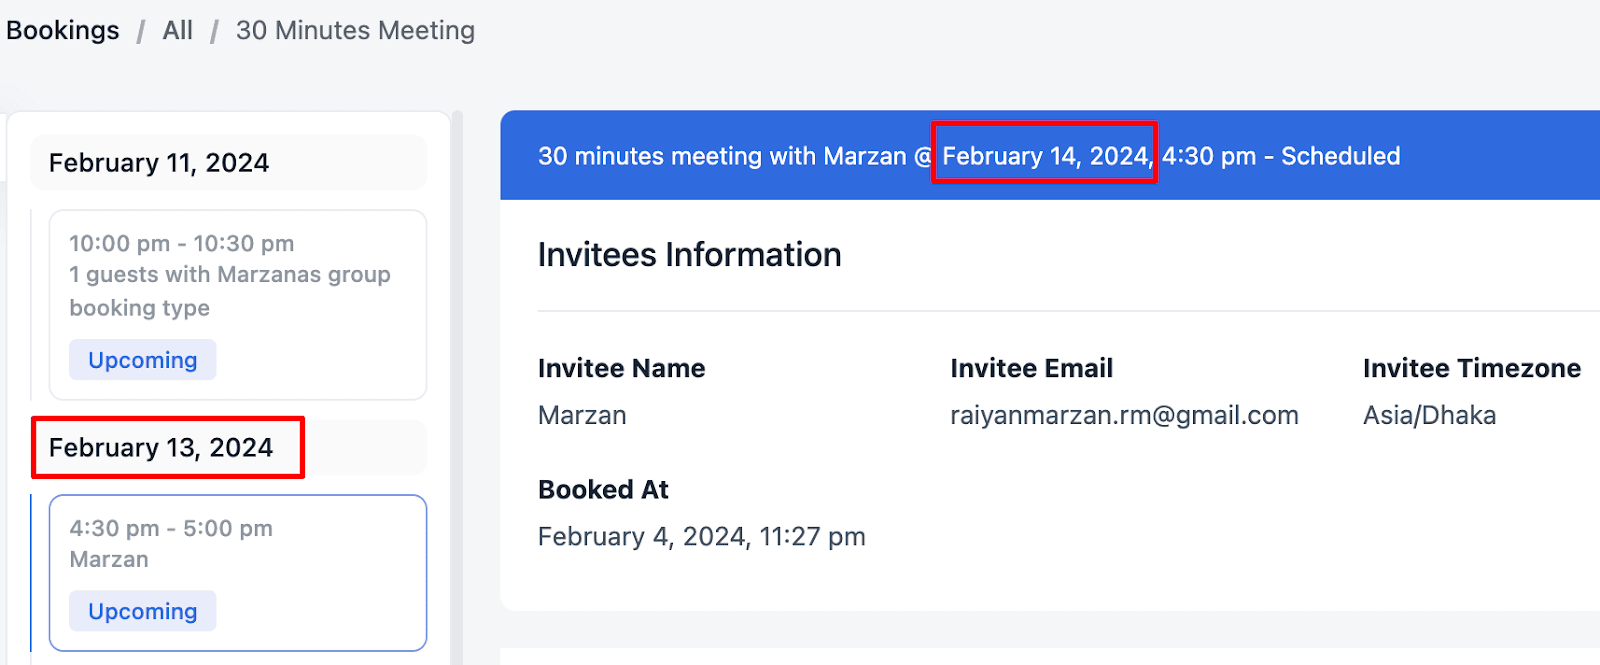 booking date mismatch issue fixed